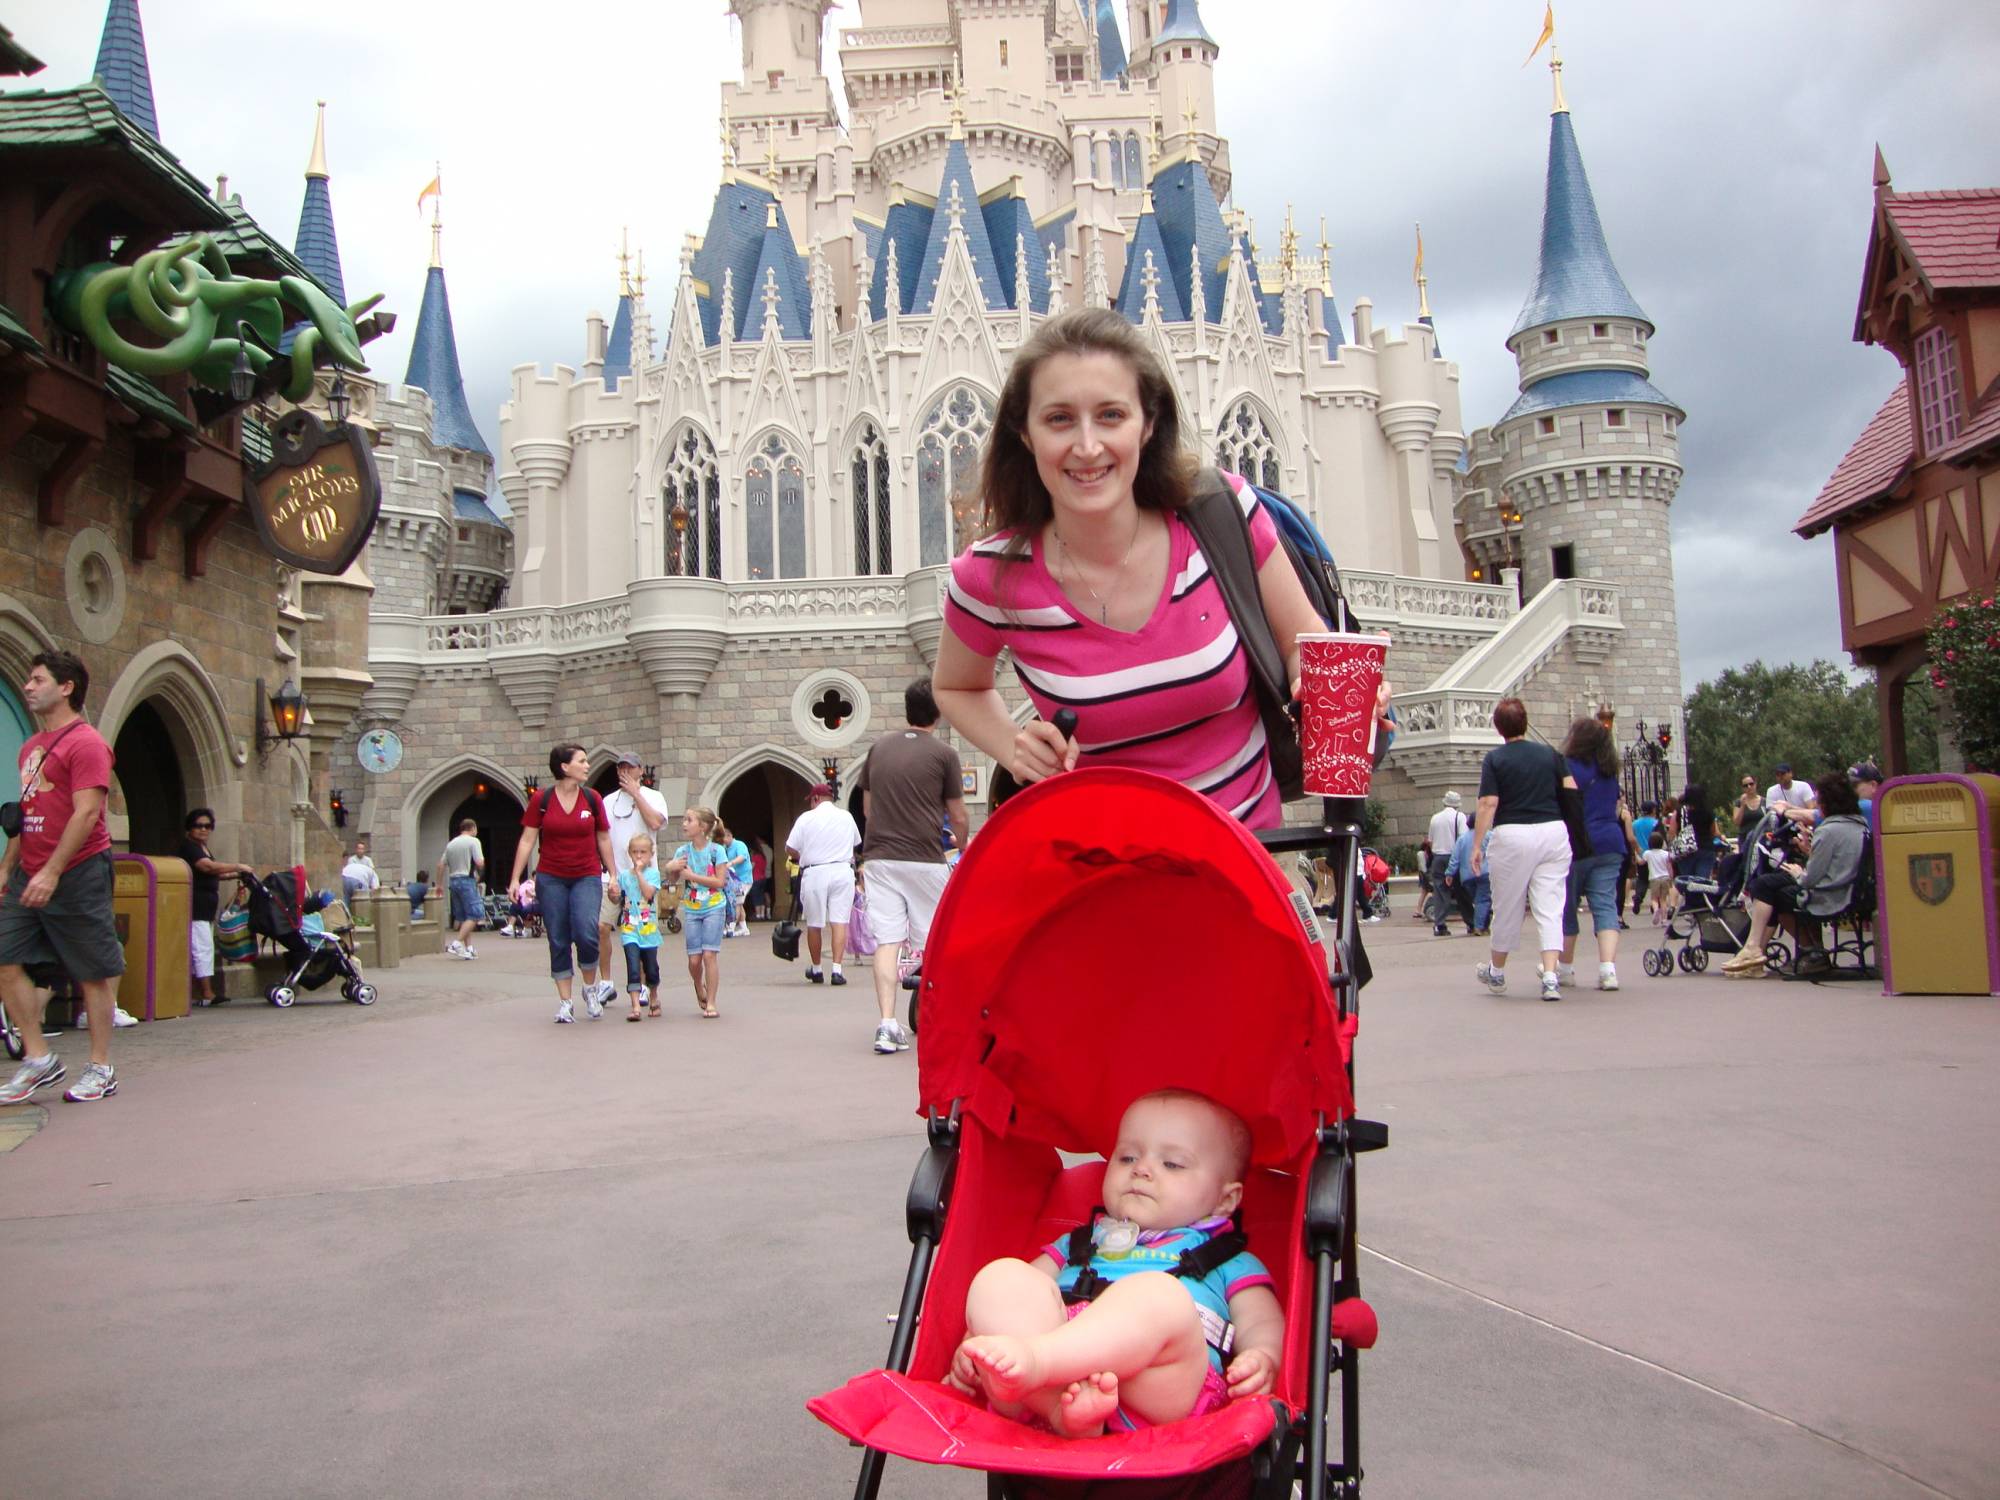 See the Magic Kingdom in a whole new light as a parent! |PassPorter.com